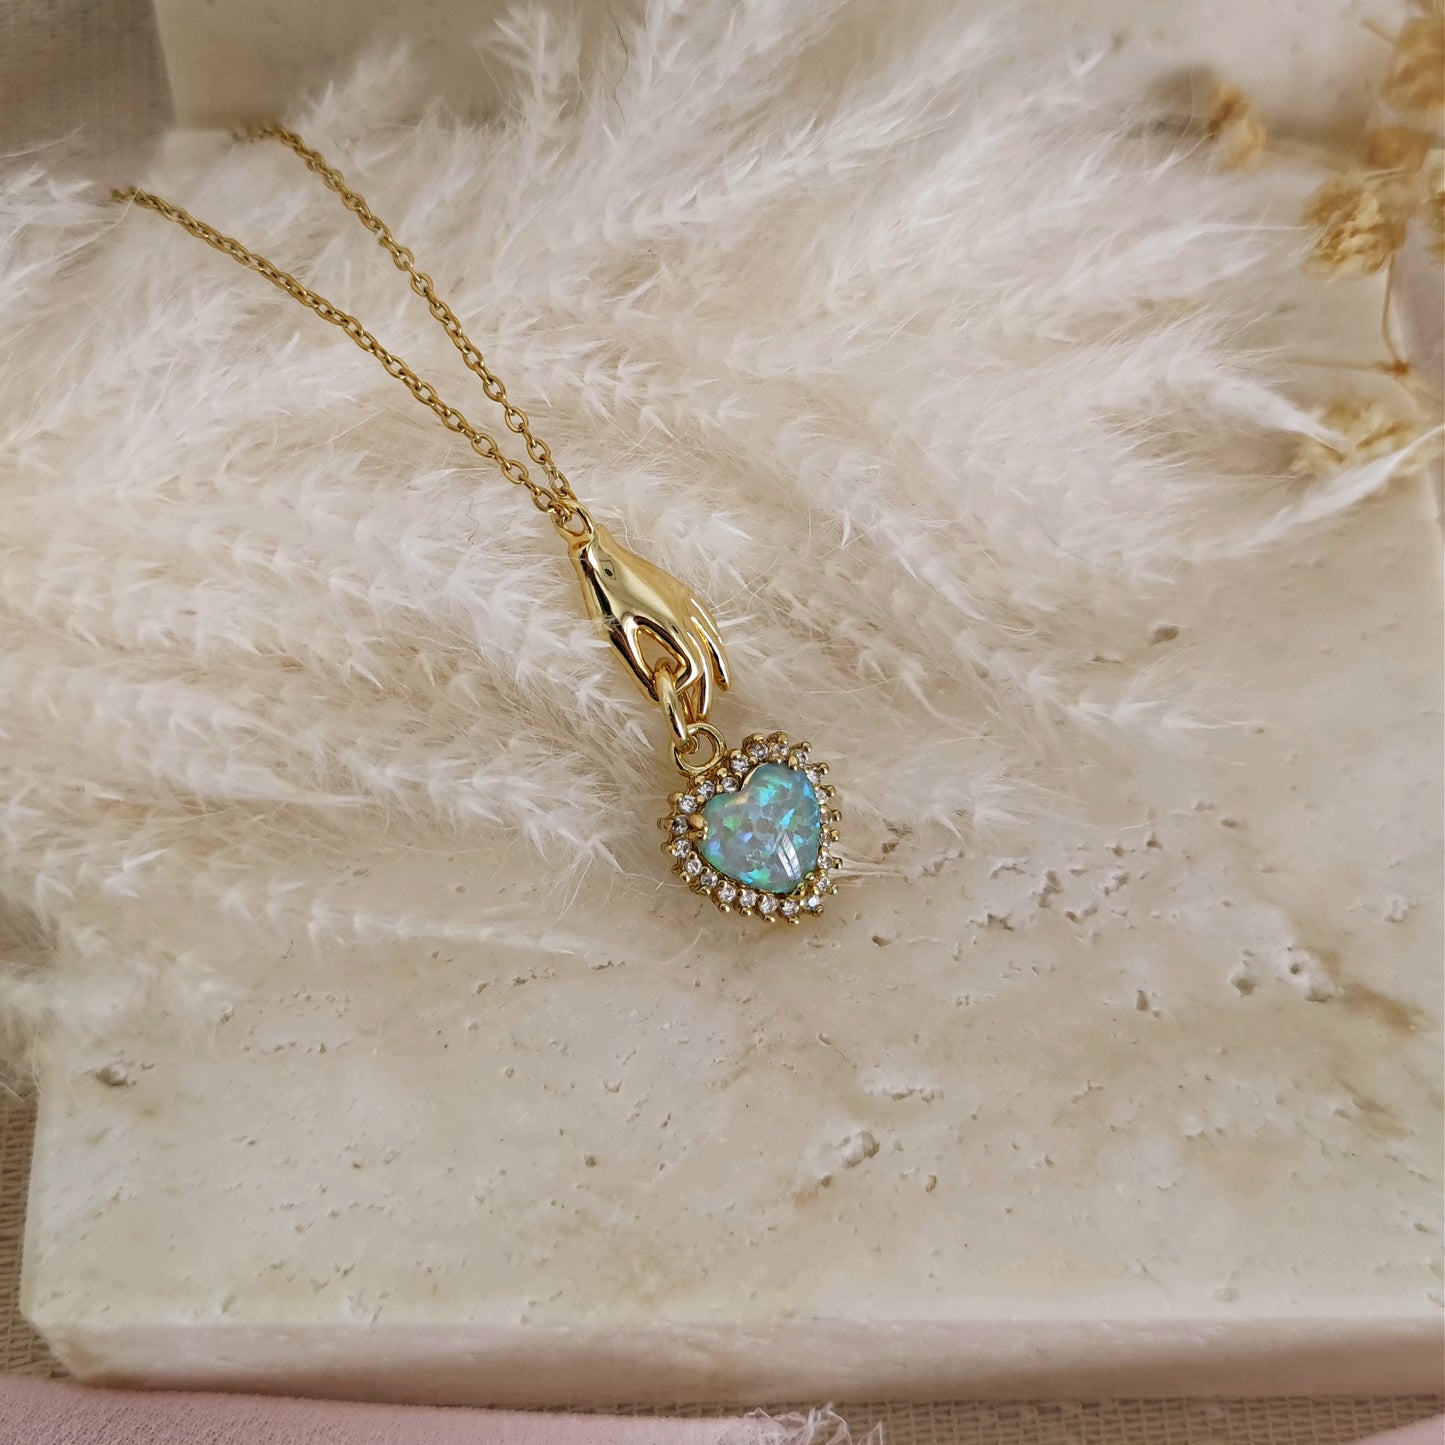 "Keeper of My Heart" necklace with opal